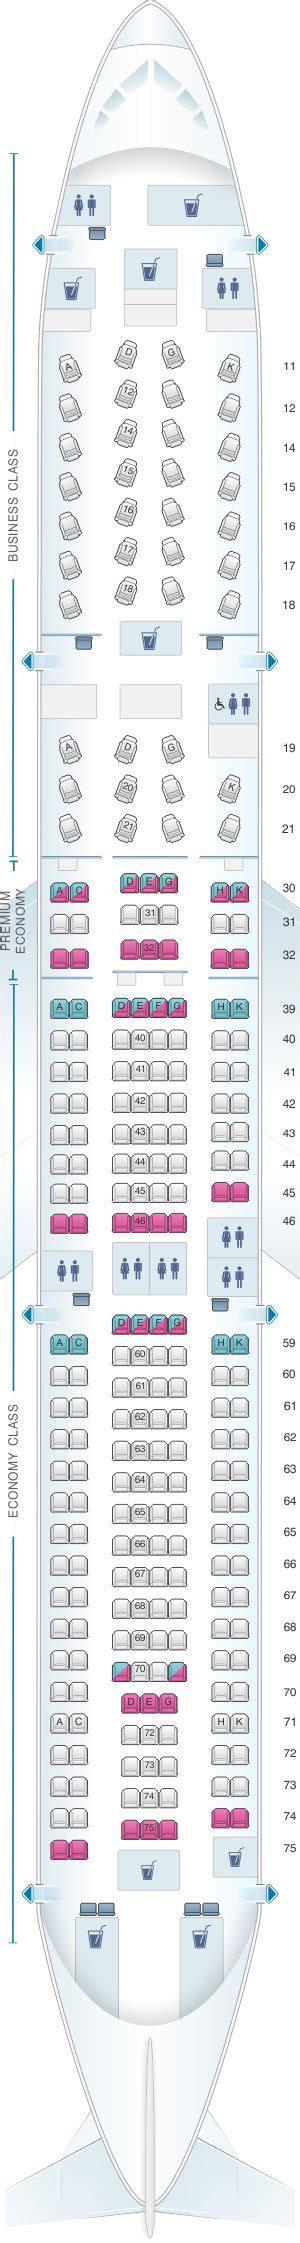 Seat Map Cathay Pacific Airways Airbus A330 300 33k Cathay Pacific